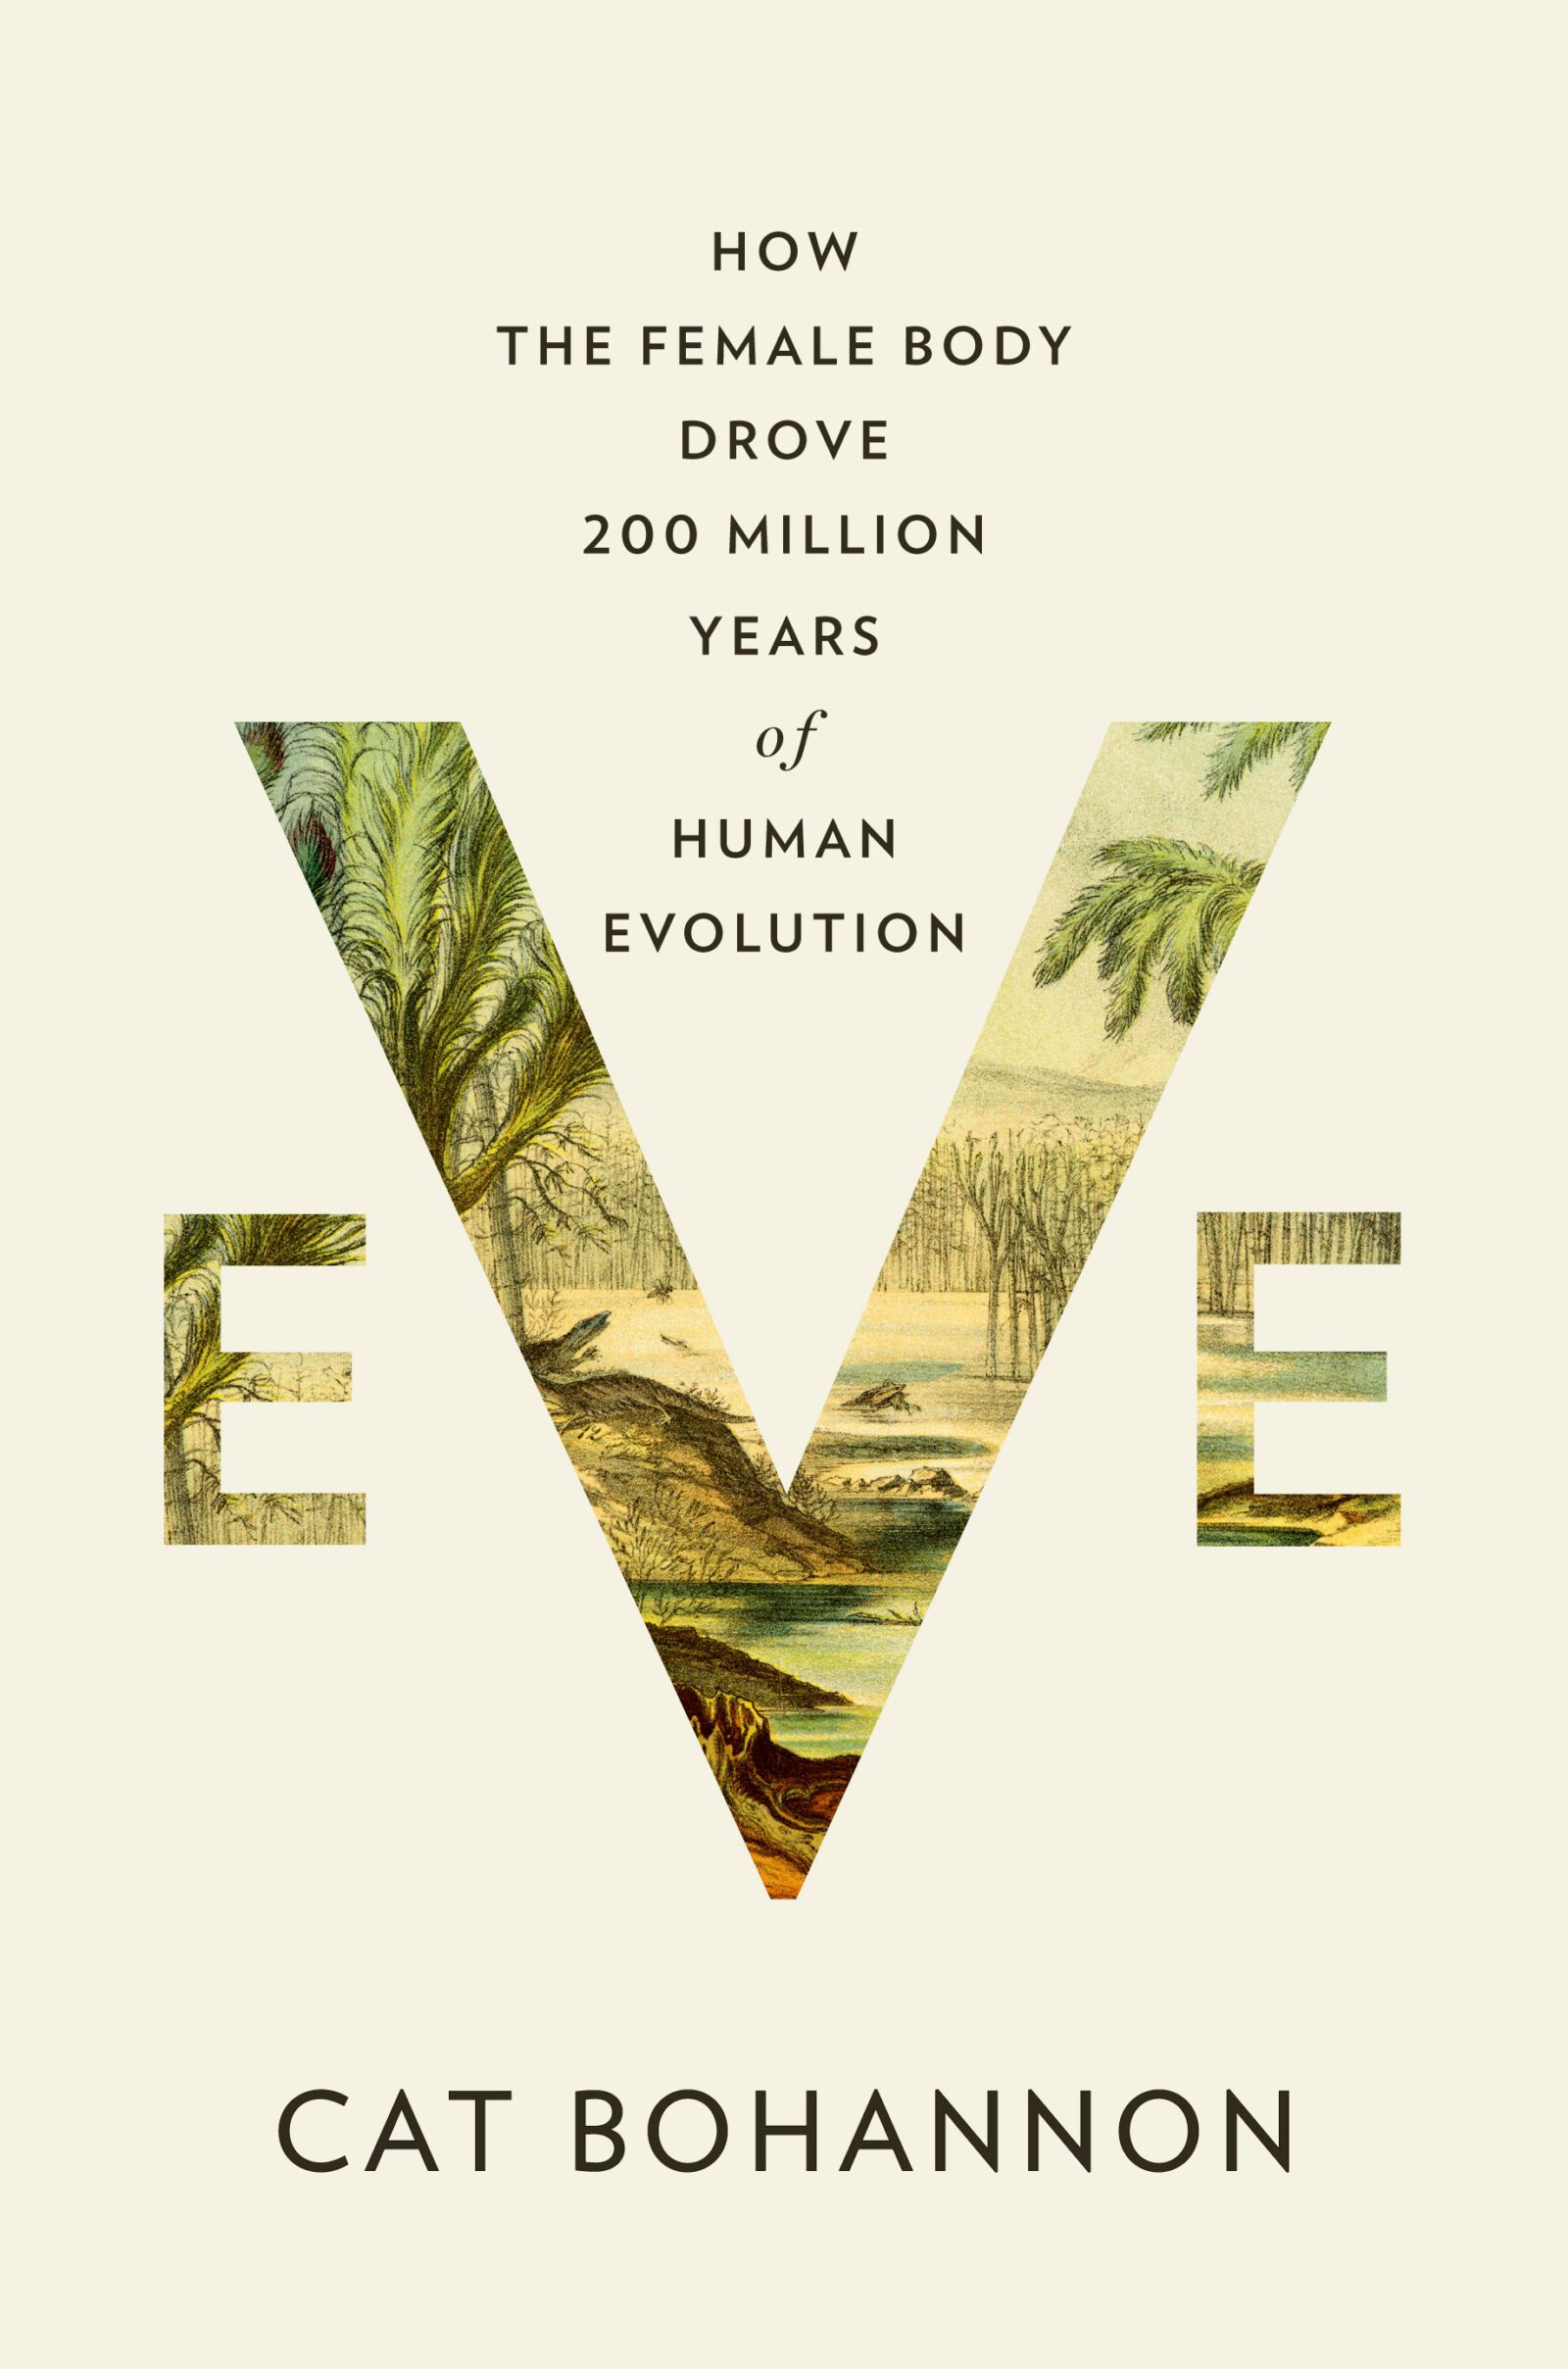 Cover image of book "Eve - How the Female Body Drove 200 Million Years of Human Evolution" by Cat Bohannon